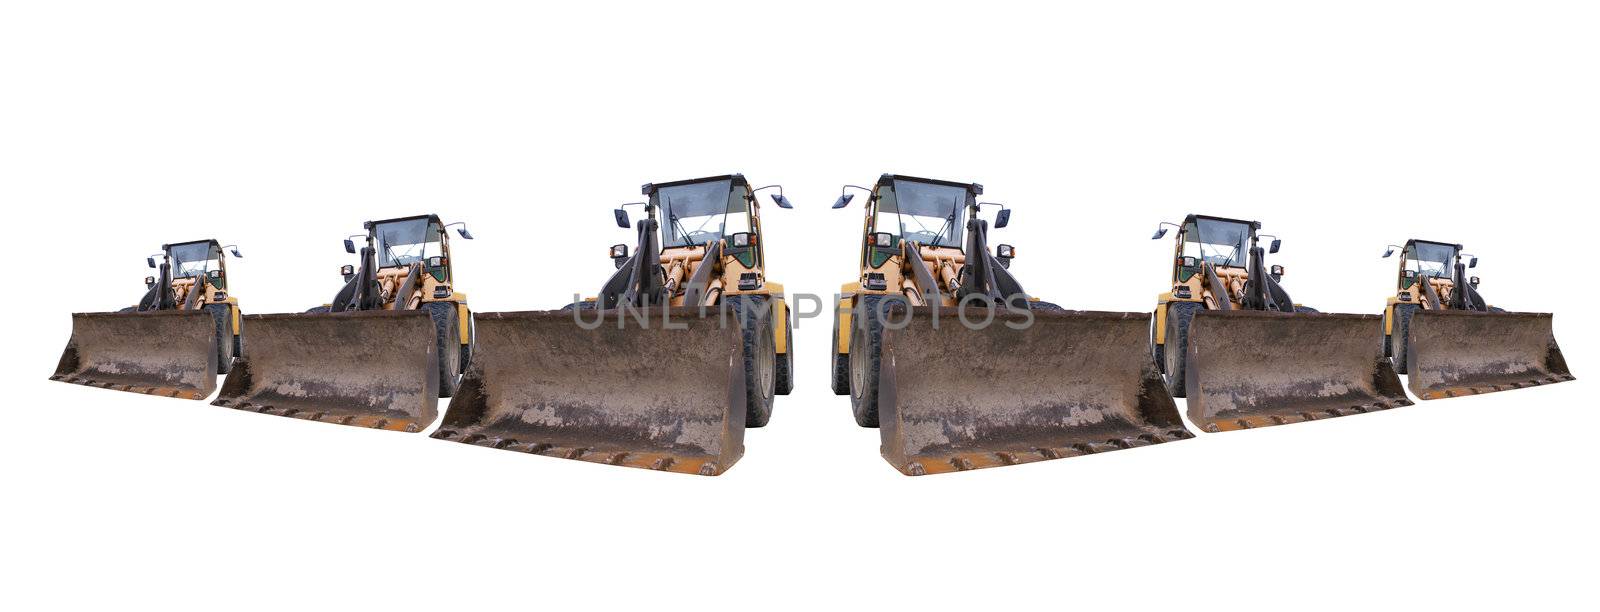 Excavators isolated by photochecker